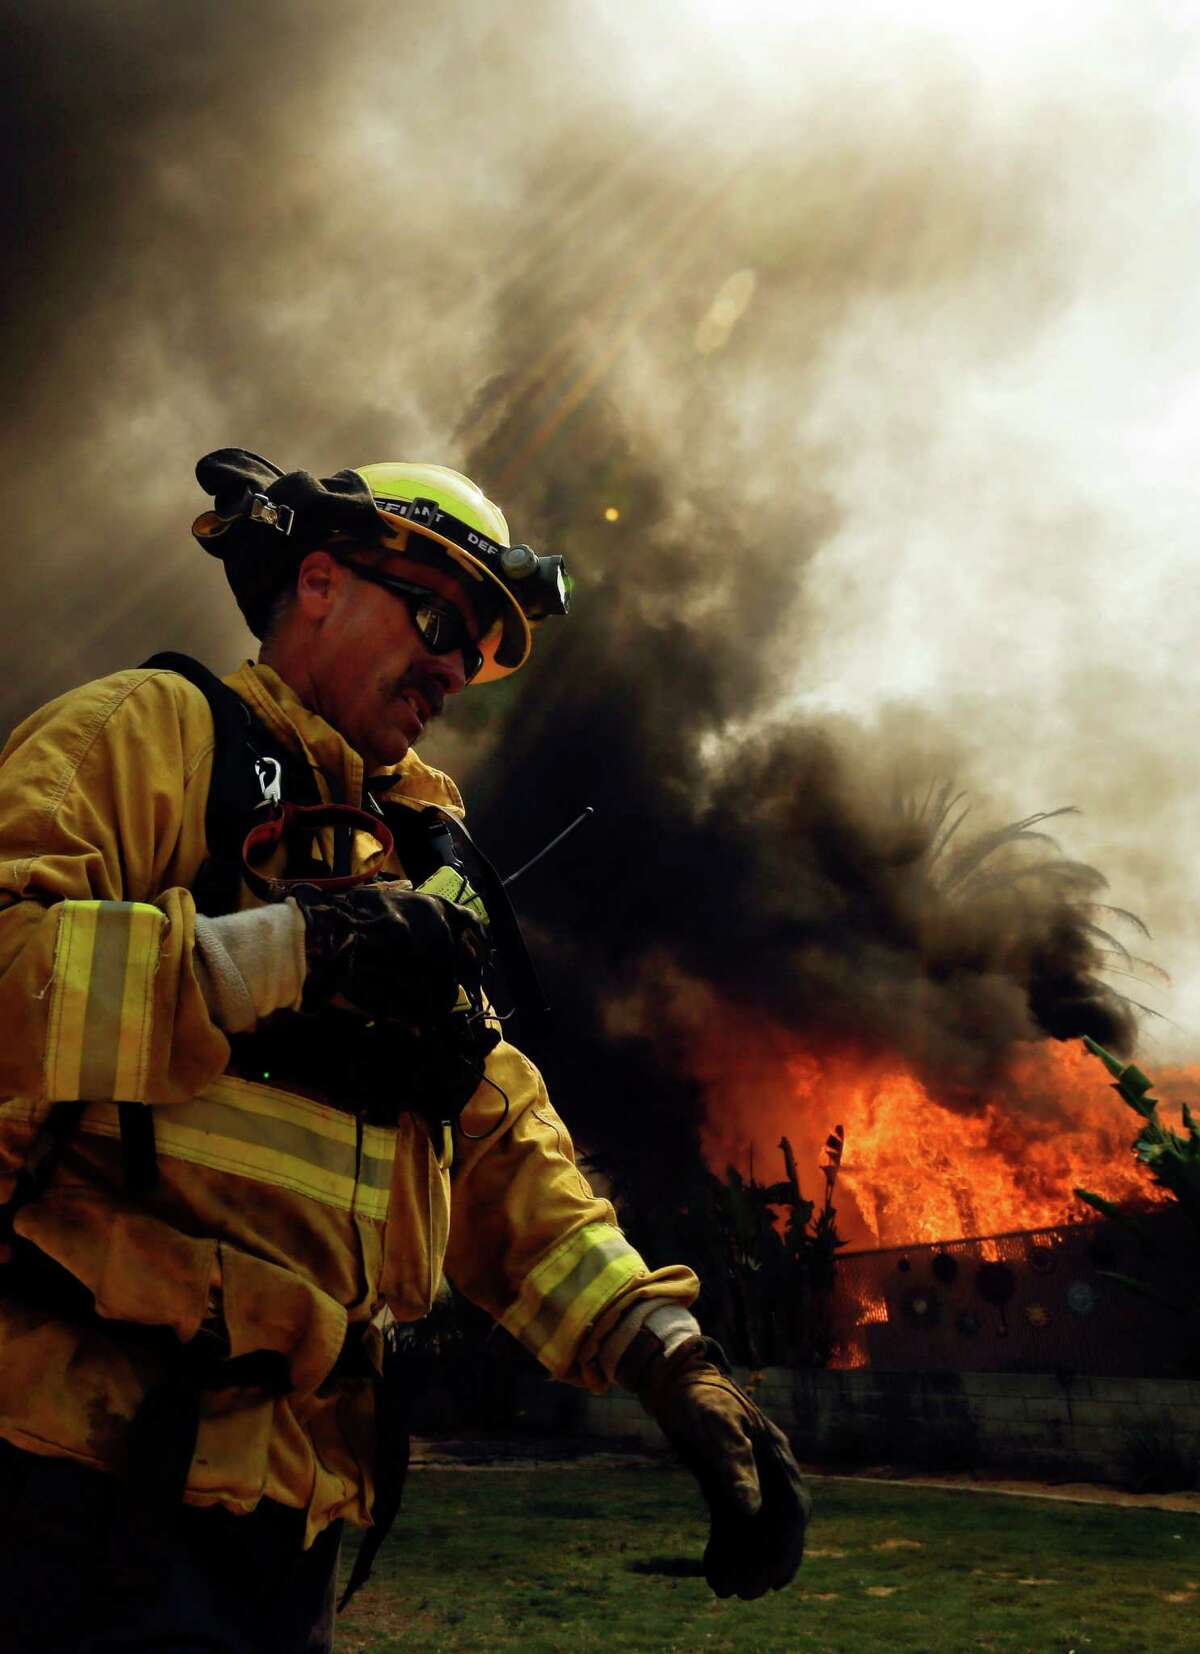 A firefighter moves past a burning structure during a wildfire Thursday, May 15, 2014, in Escondido, Calif. One of the nine fires burning in San Diego County suddenly flared Thursday afternoon and burned close to homes, trigging thousands of new evacuation orders. (AP Photo/Gregory Bull)